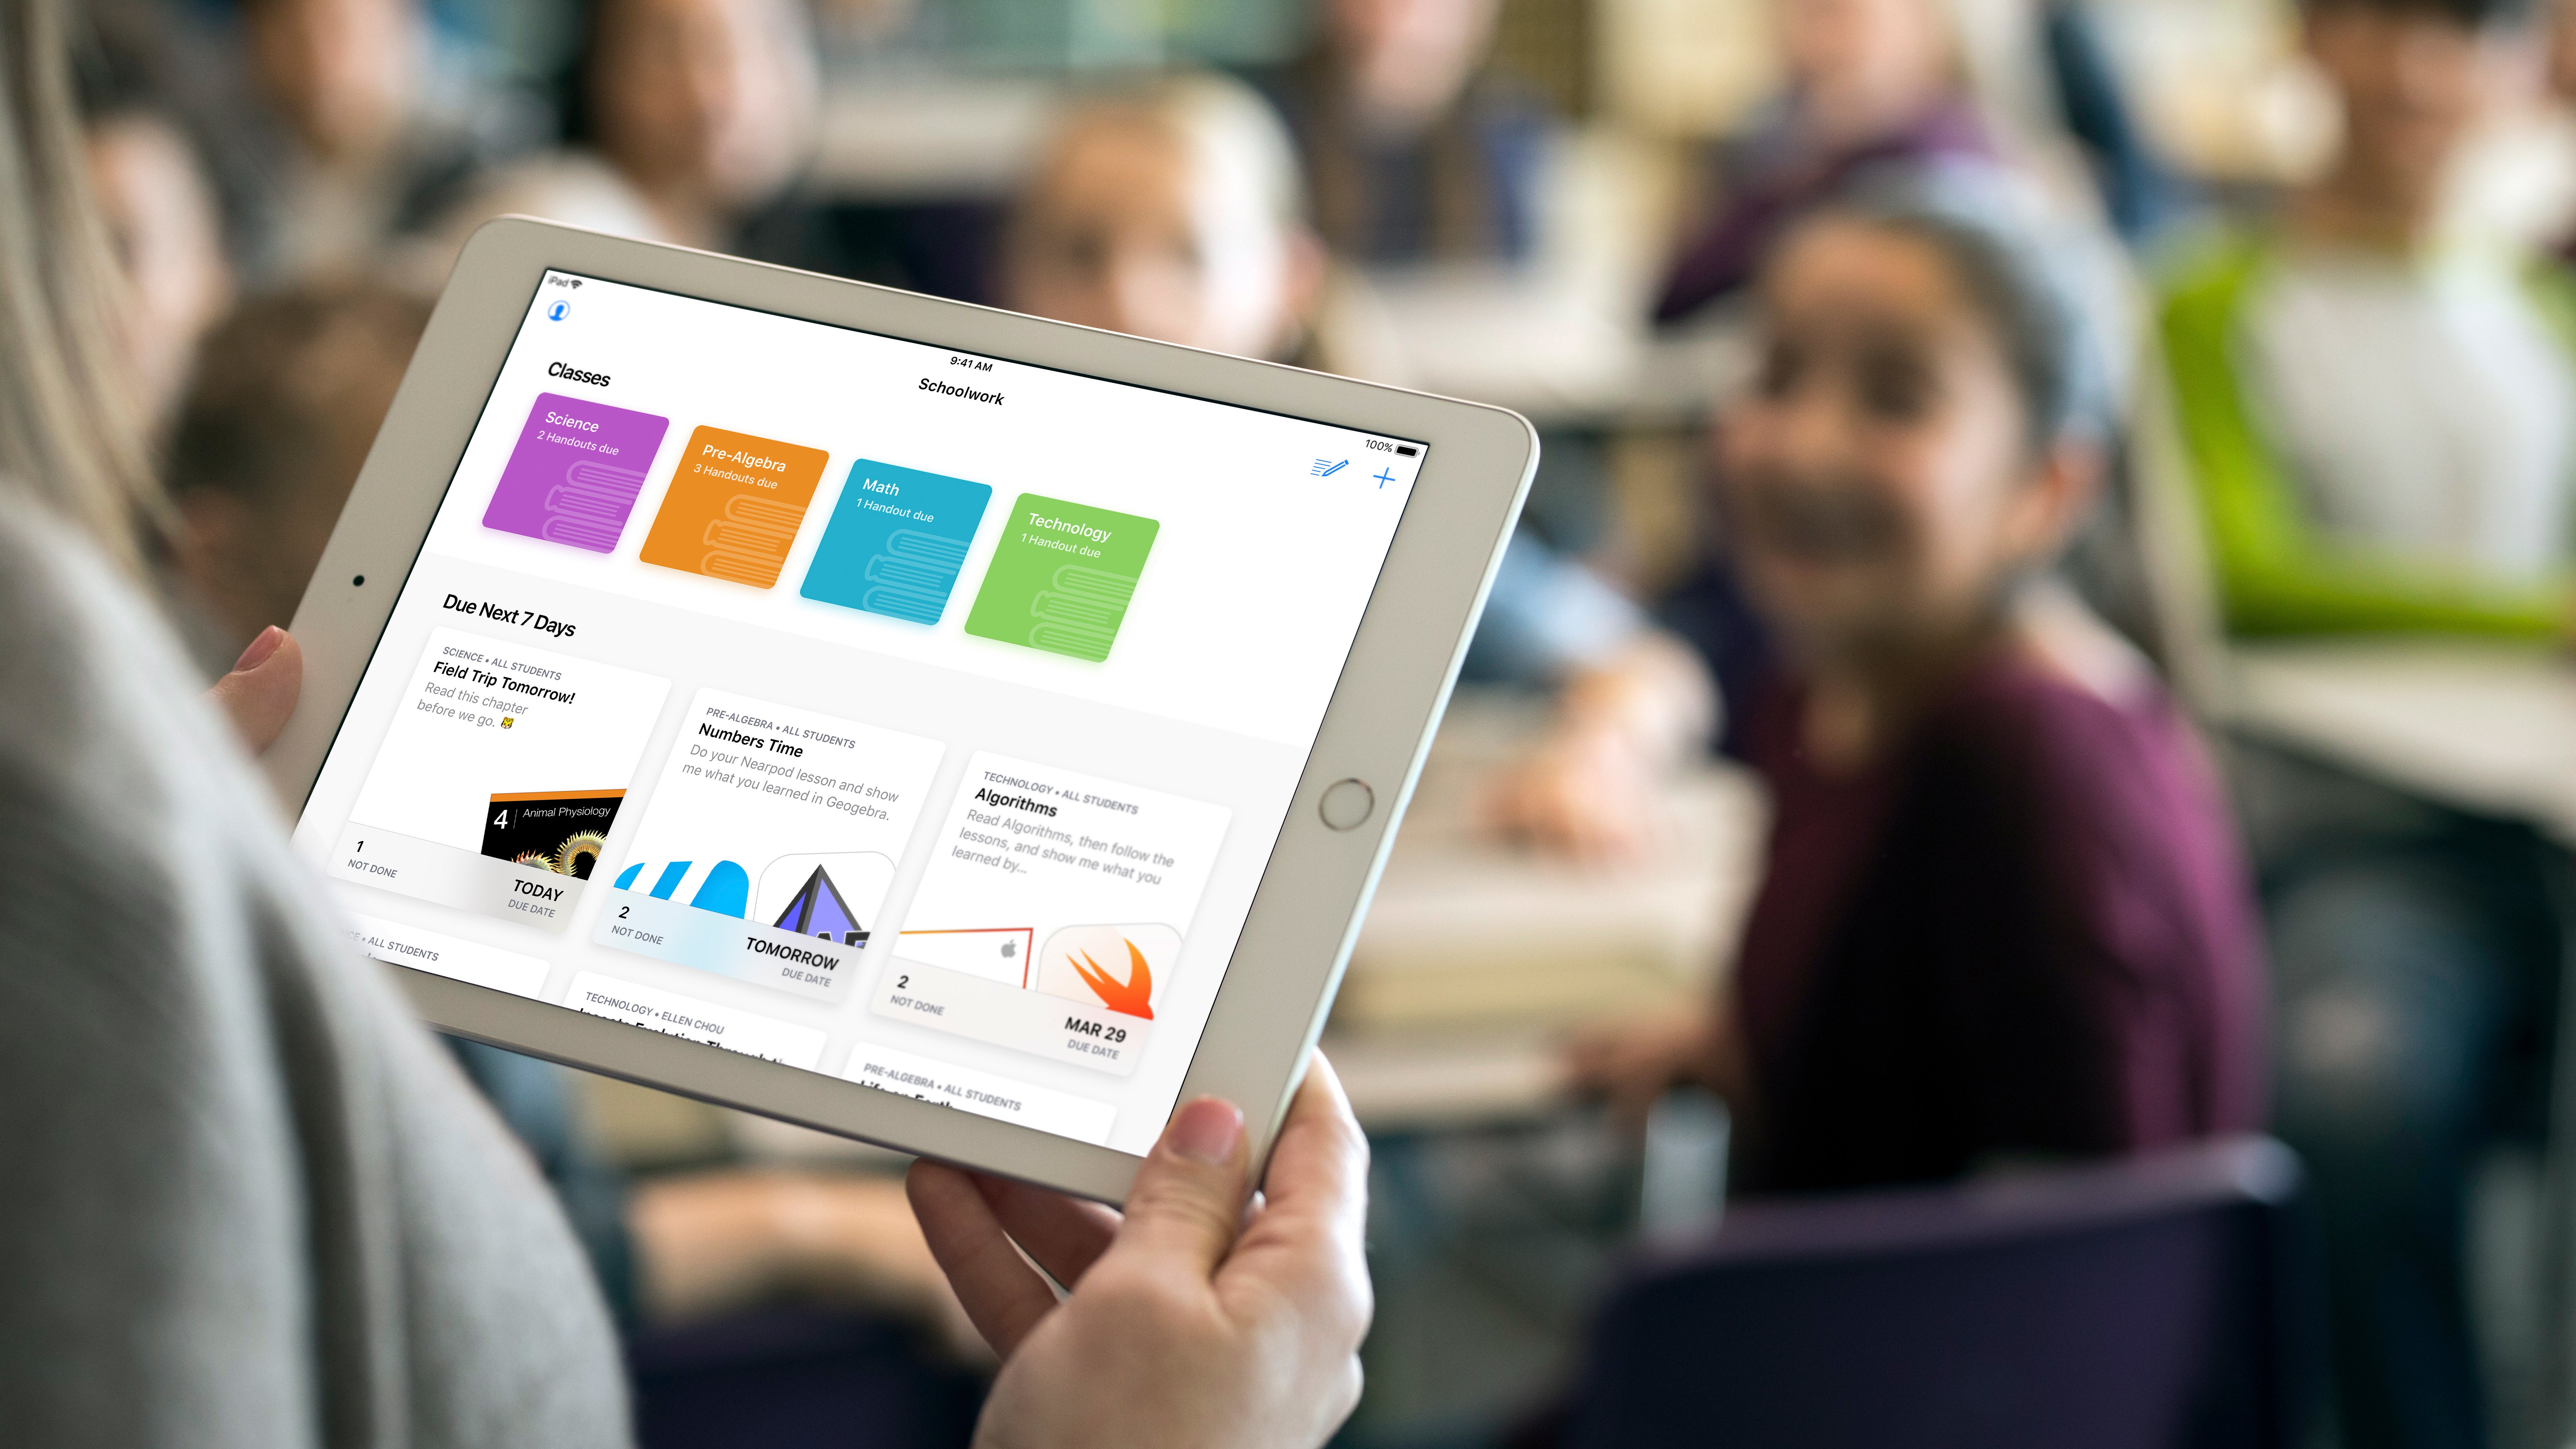 All The New Education Software Apple's Bringing To iPads ...